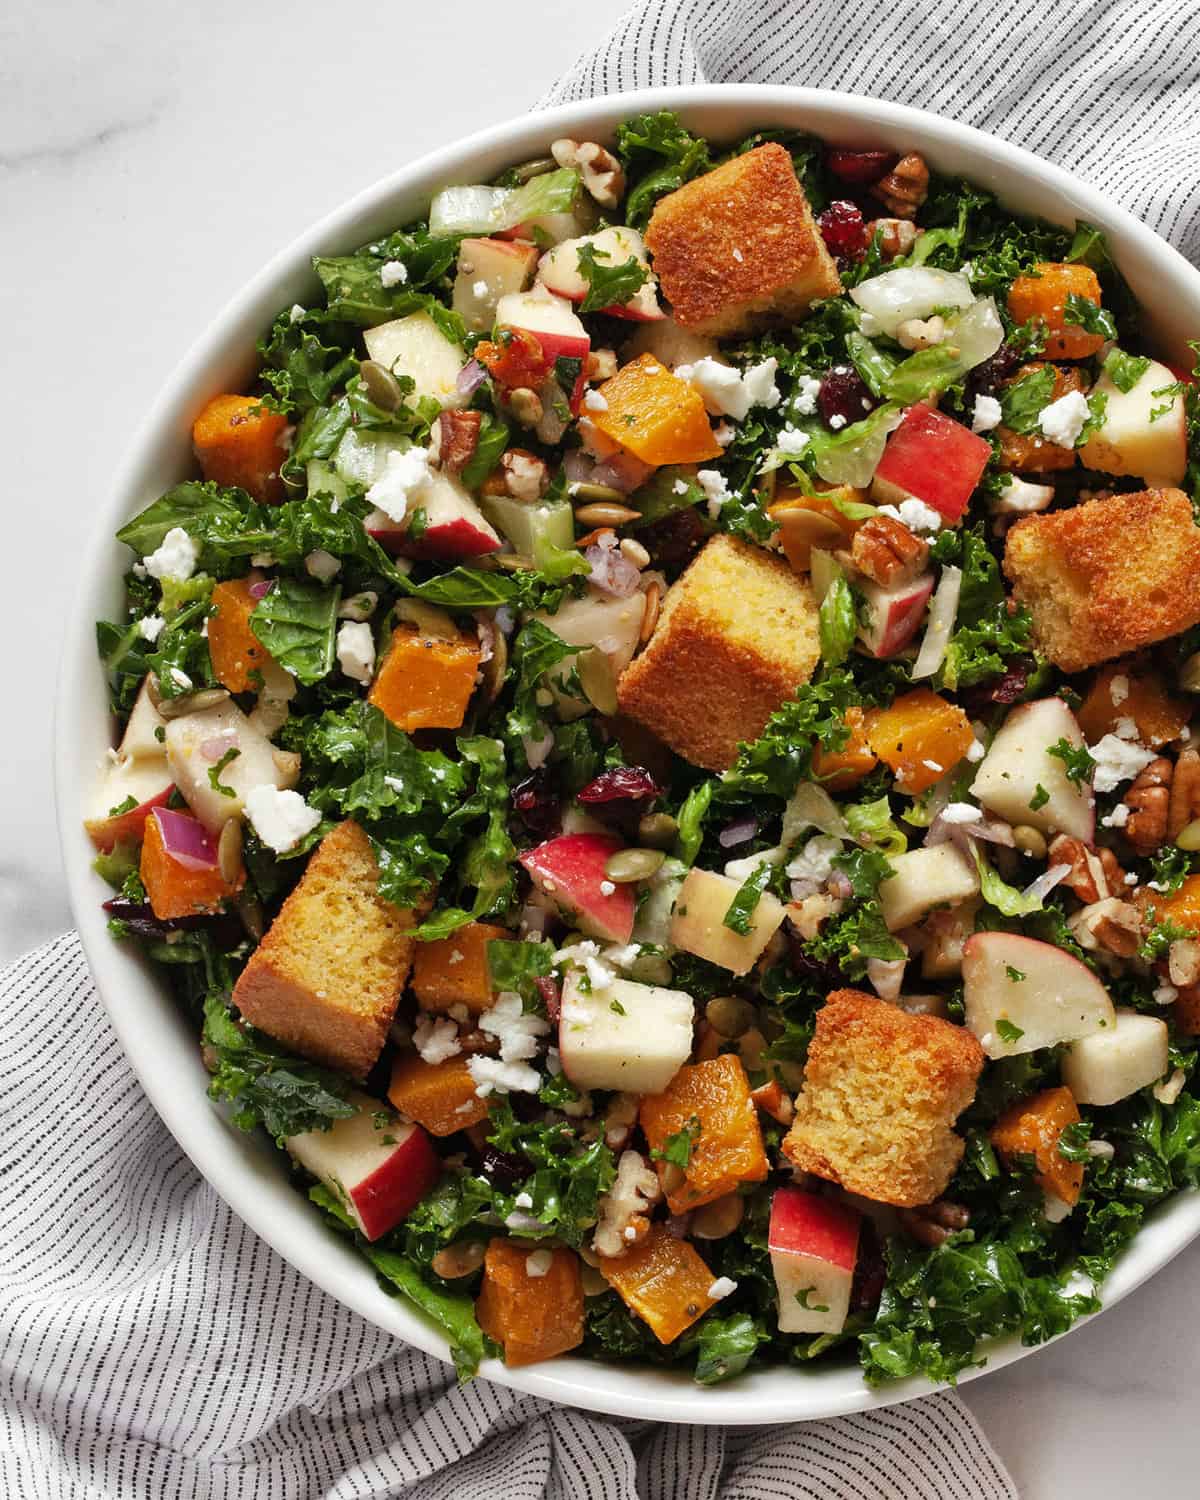 Salad with roasted butternut squash, apples, kale and romaine in a bowl.